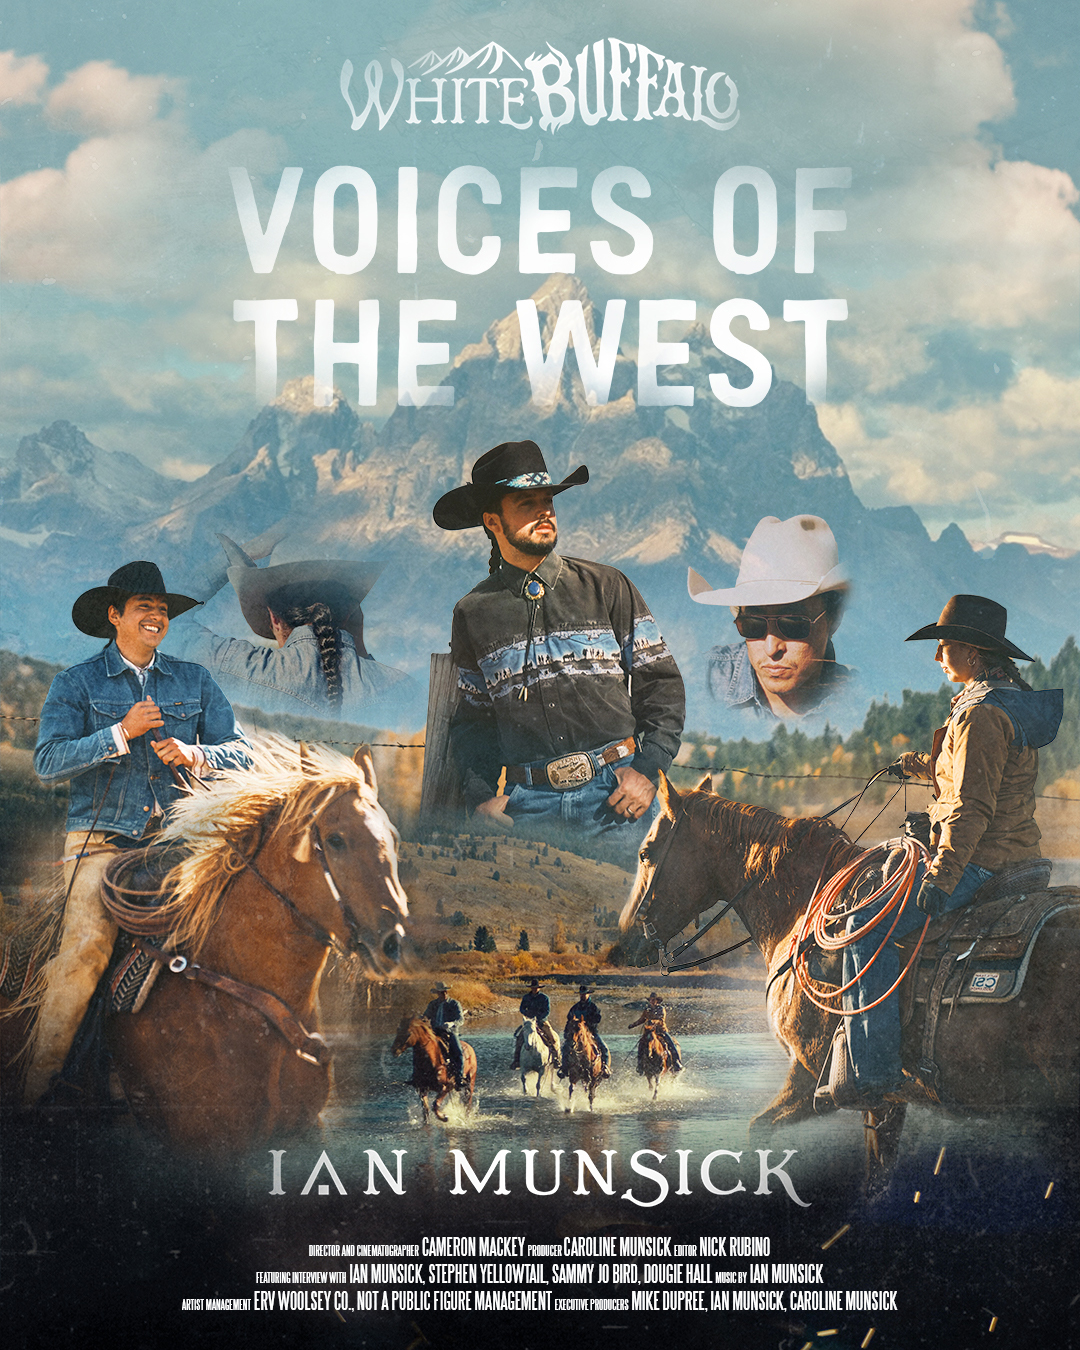  IAN MUNSICK HIGHLIGHTS 'VOICES OF THE WEST' IN NEW DOCUMENTARY, AVAILABLE NOW